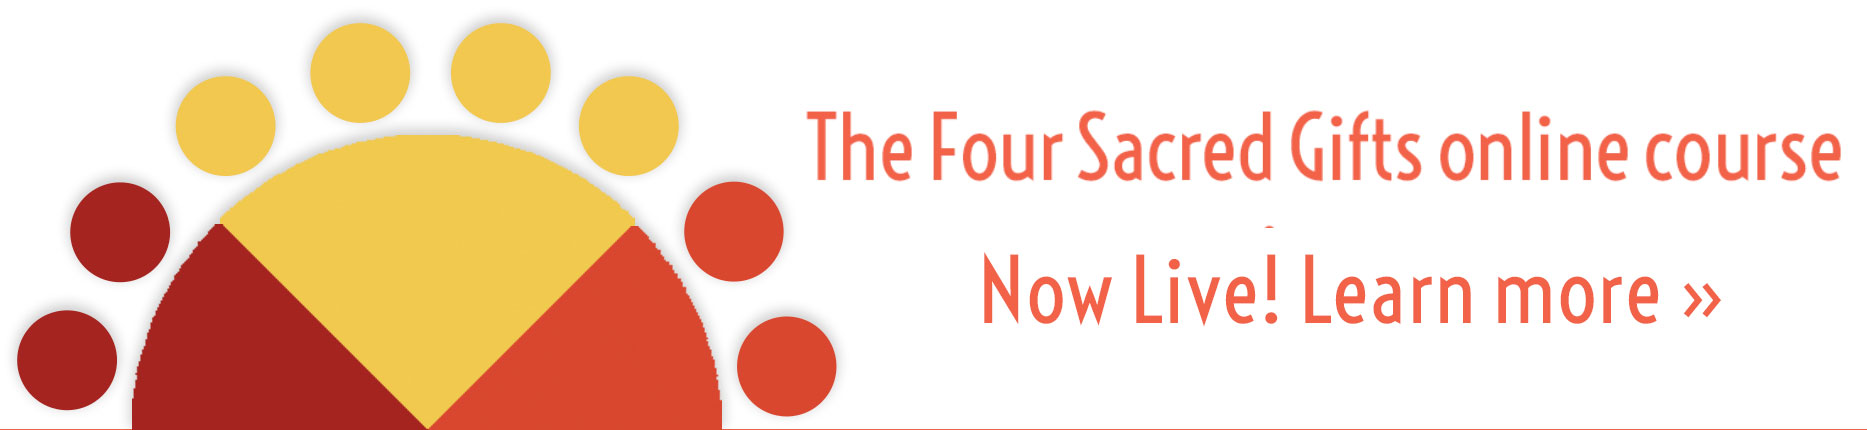 The Four Sacred Gifts Online Course